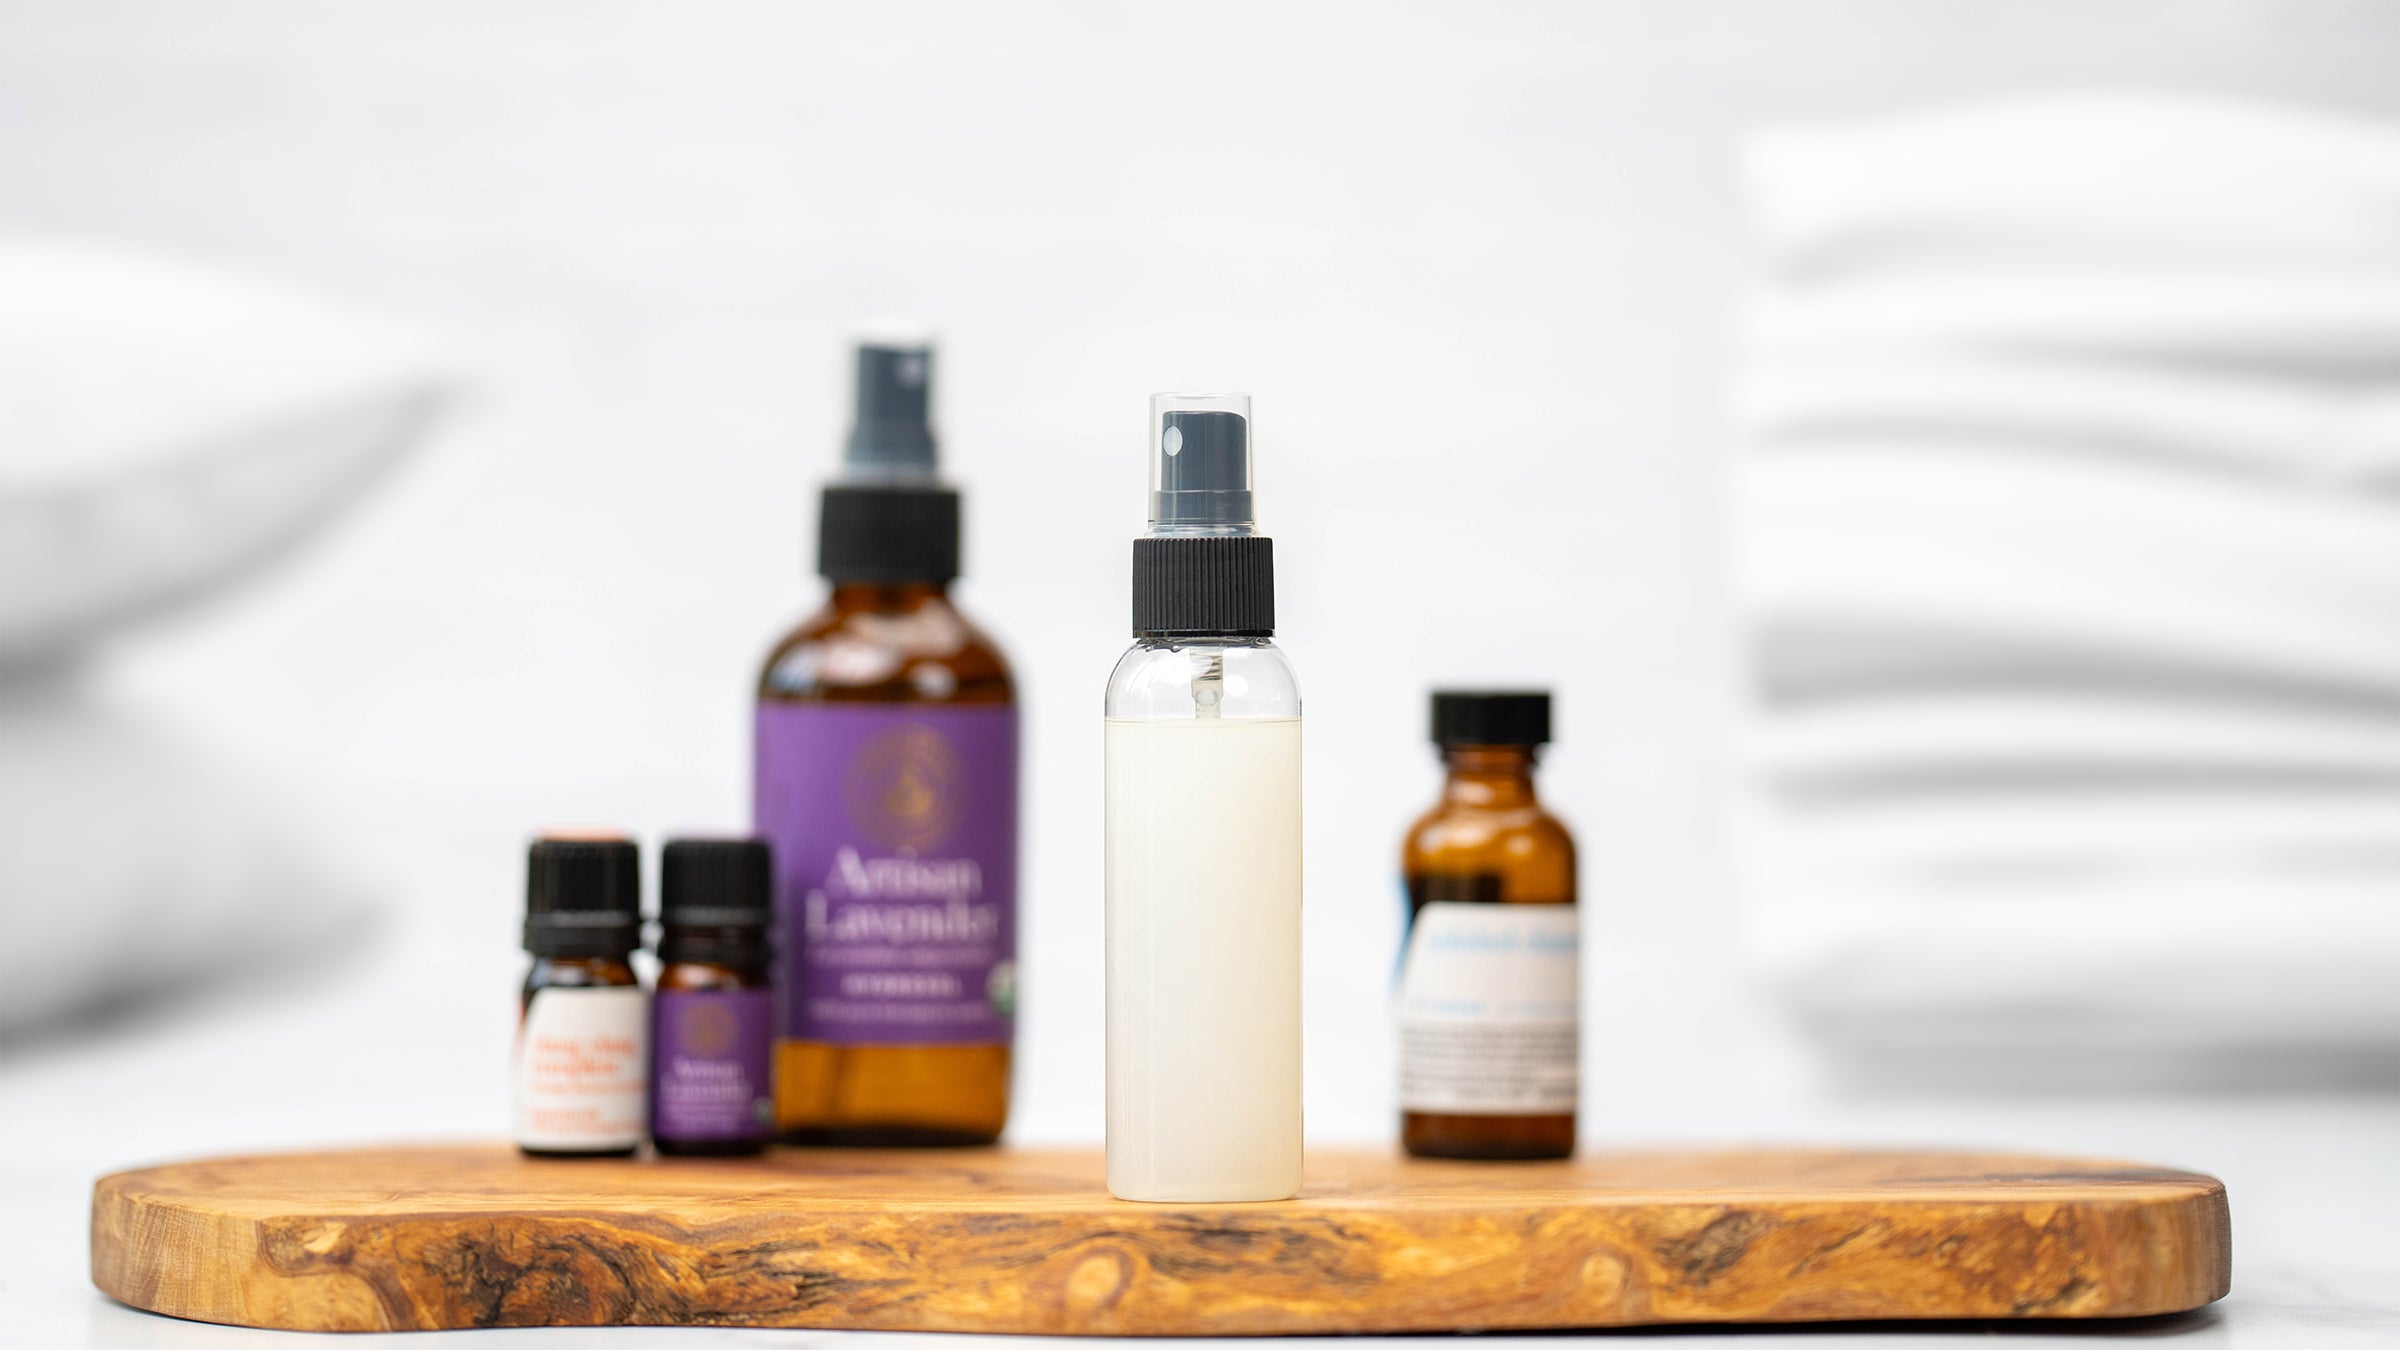 Laundry Spray bottle and Essential Oil - Lavender